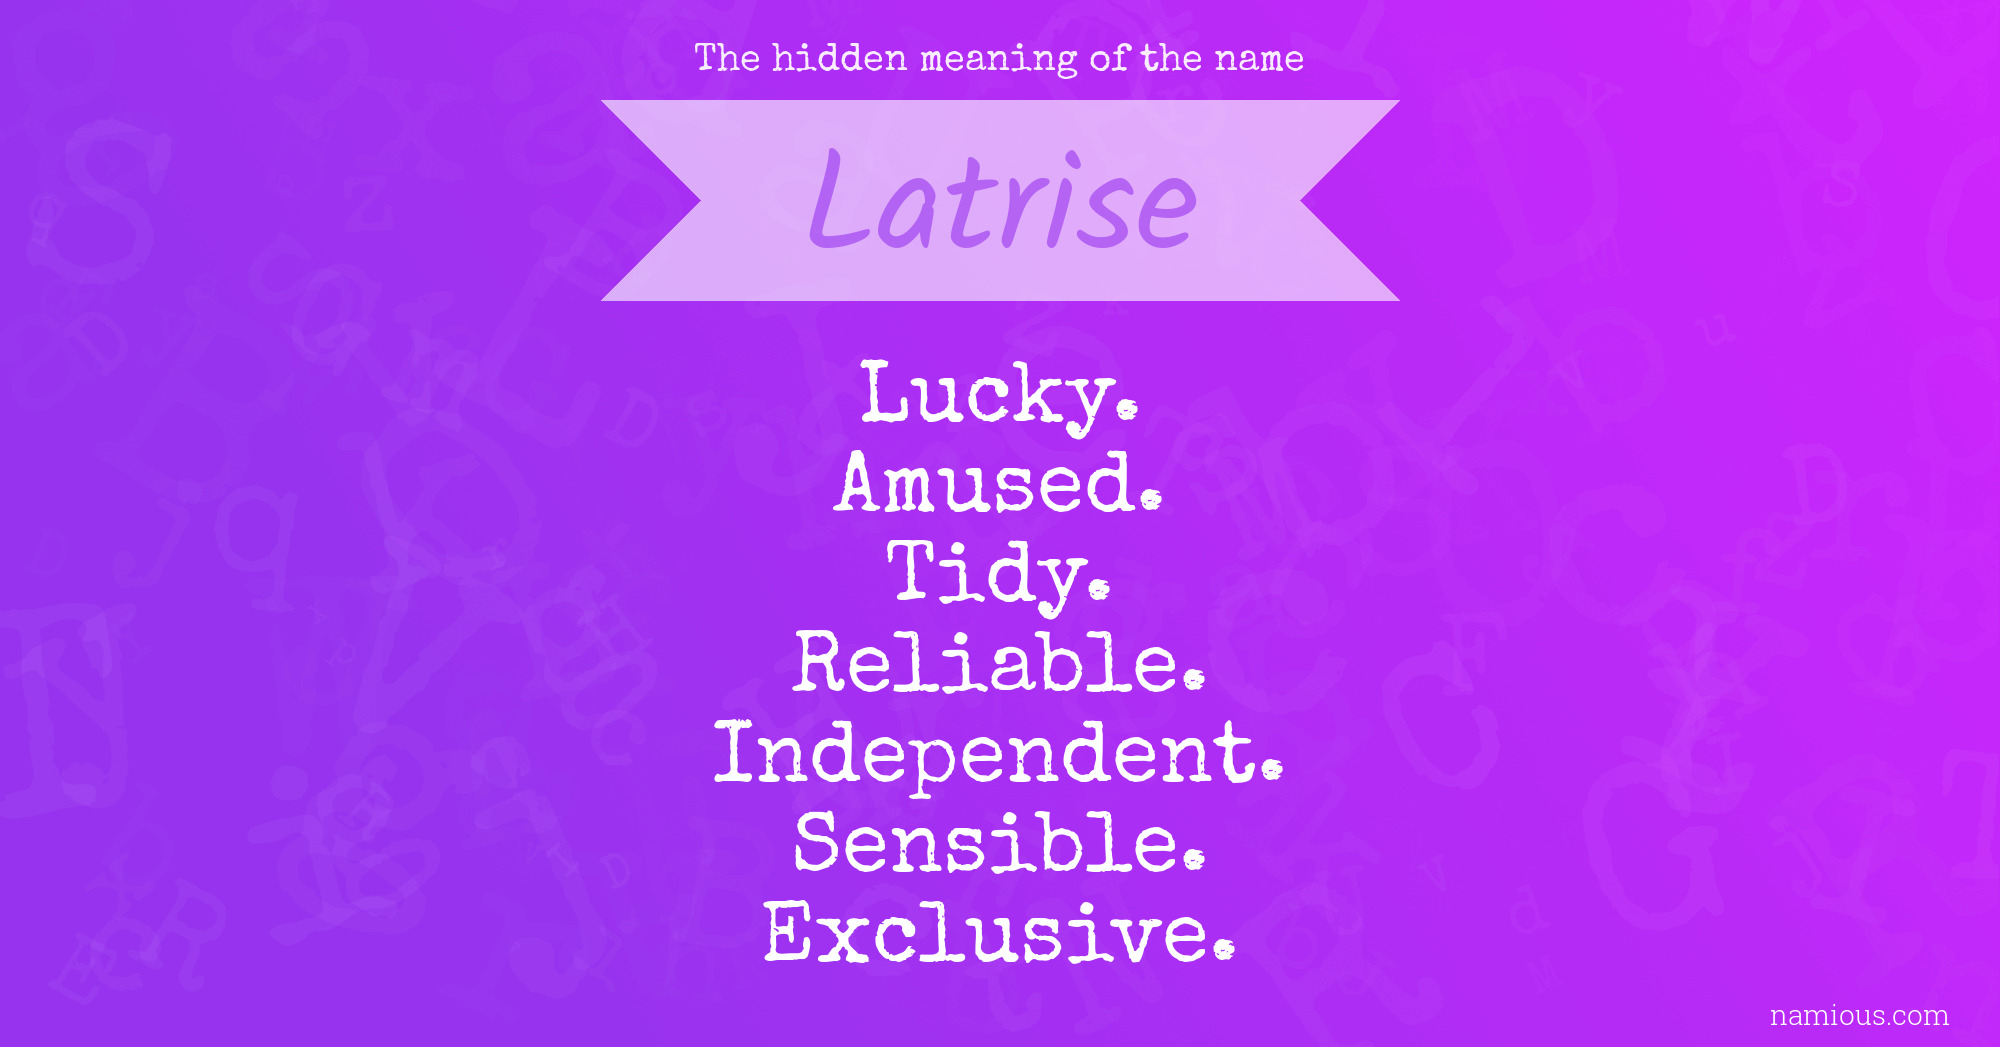 The hidden meaning of the name Latrise